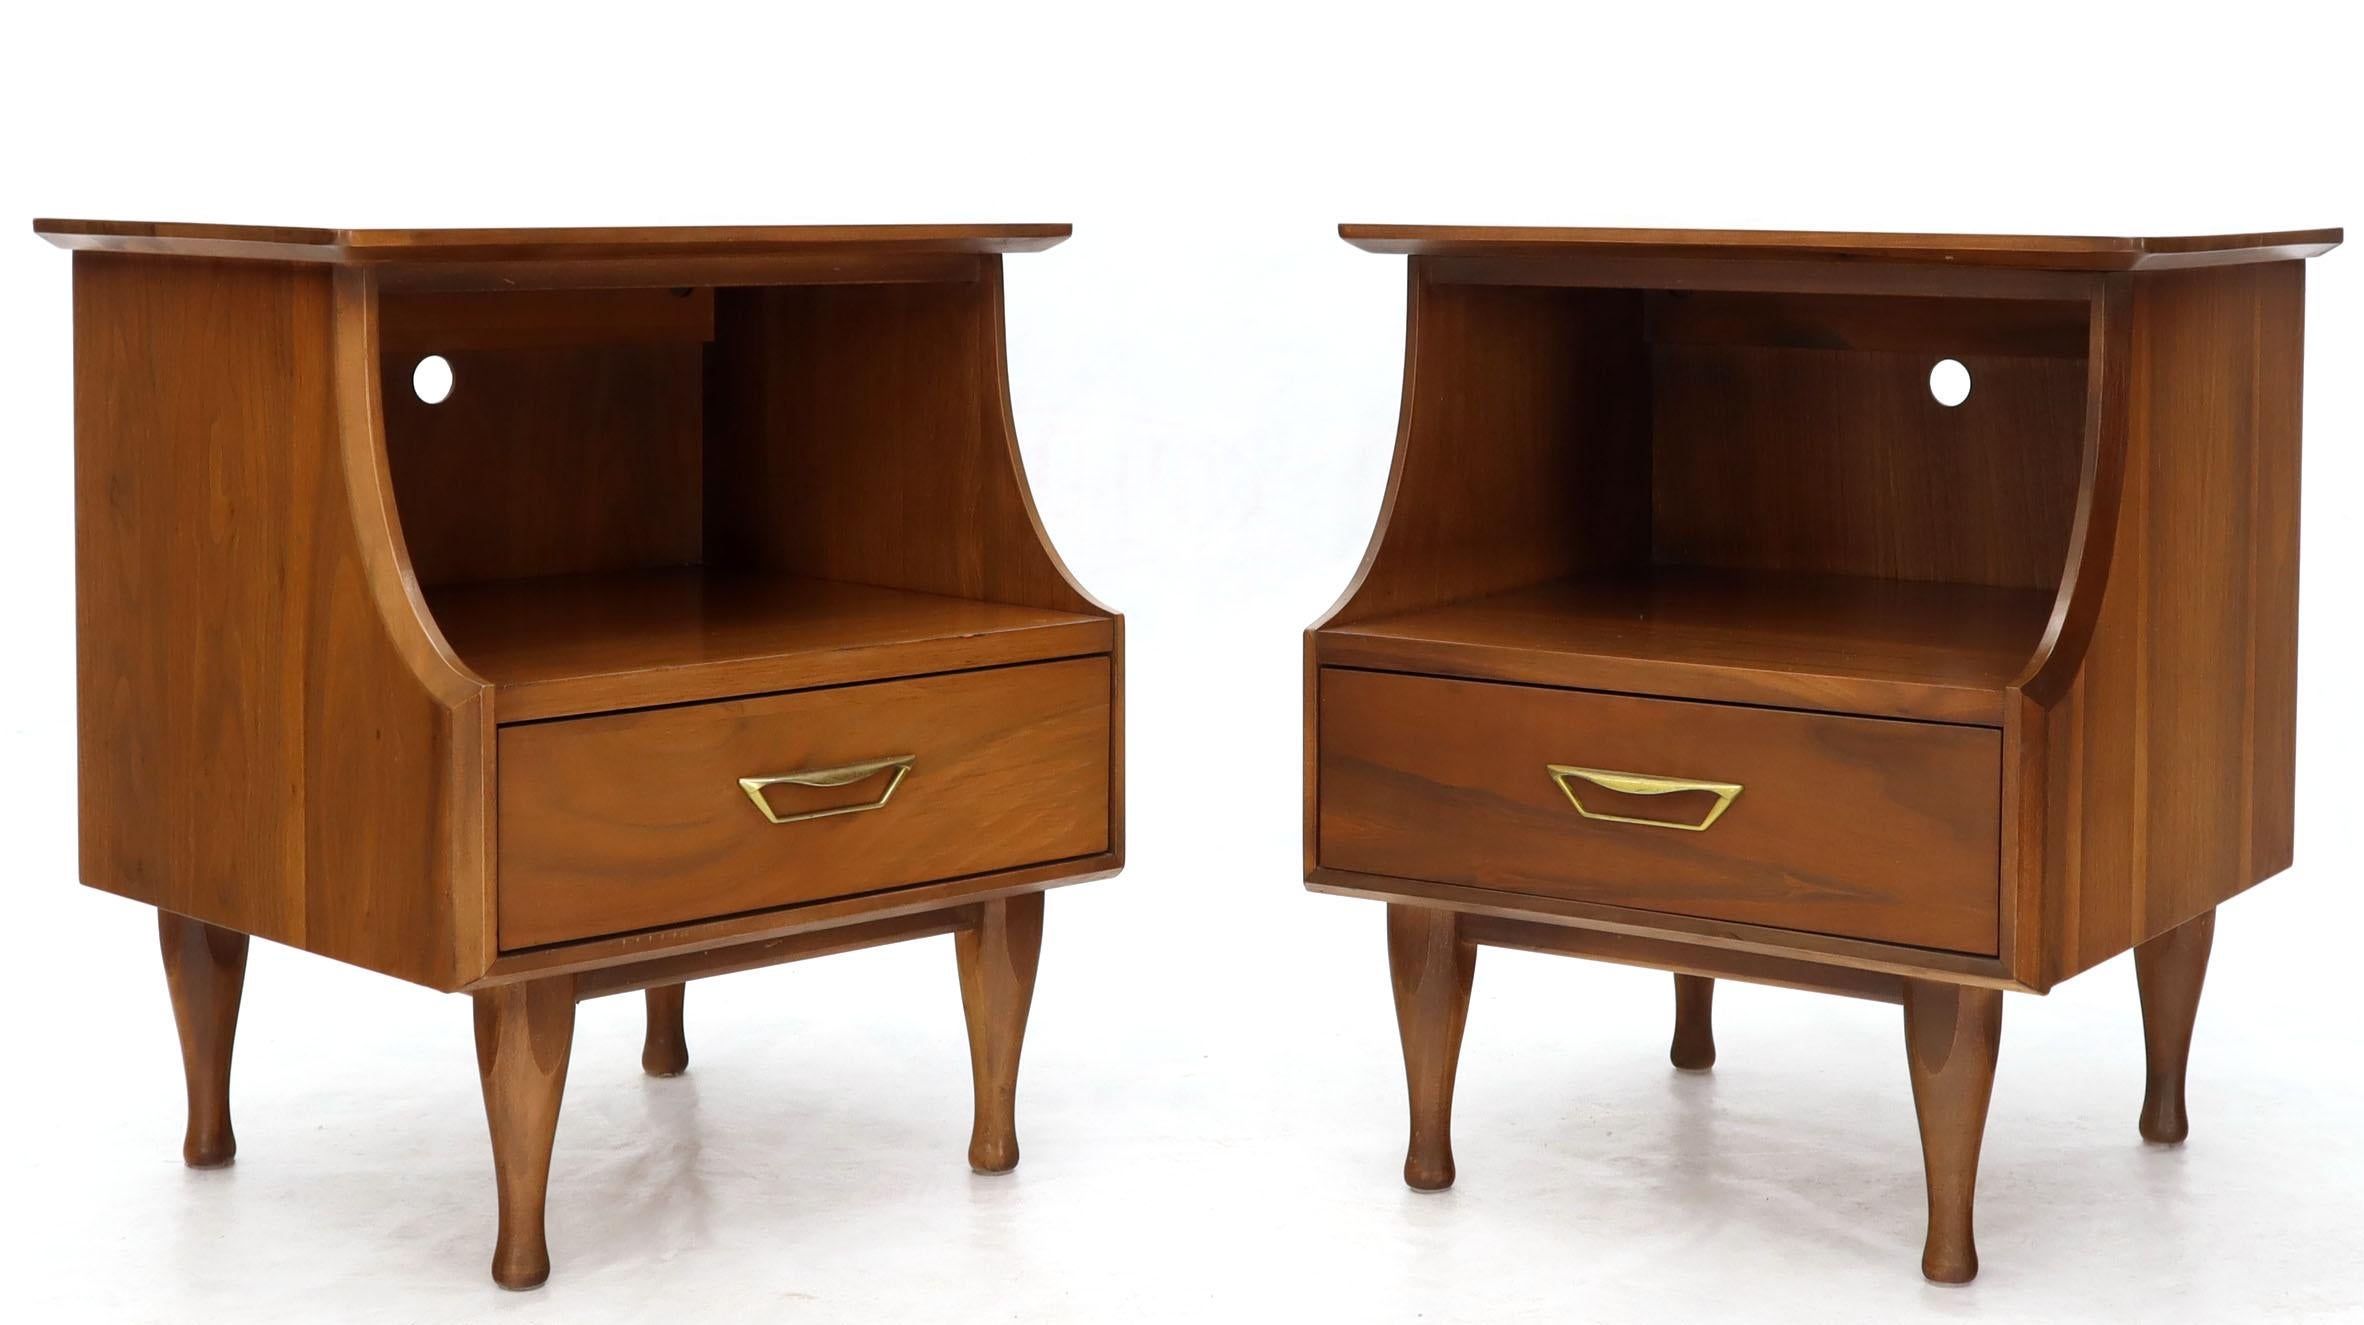 Pair of light walnut Mid-Century Modern nightstands or side tables.